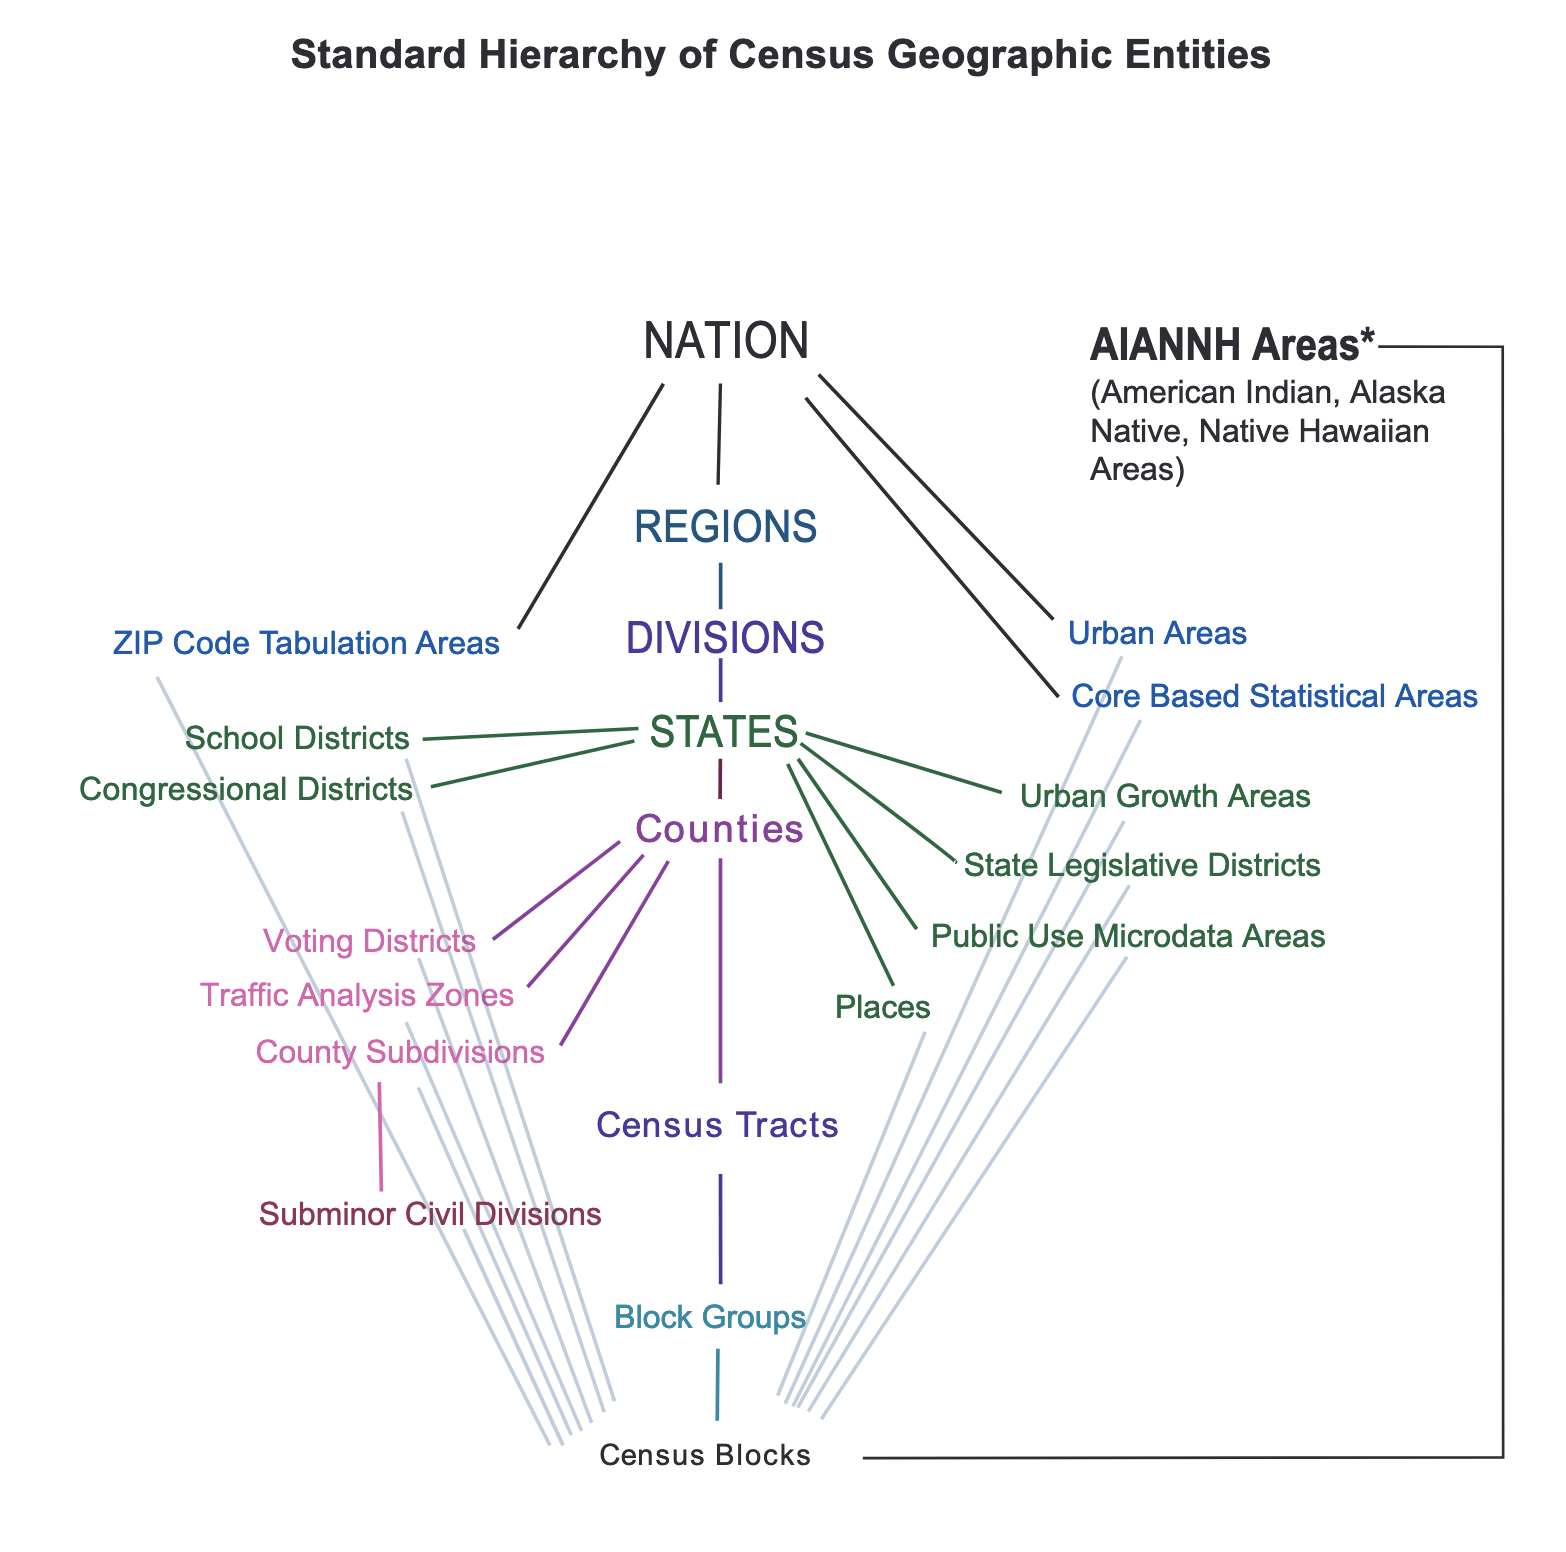 the geographic hierarchy of the Census: along the main spine
are census blocks, block groups, census tracts, counties, states, divisions, regions, and the nation; 
off of the main spine there are other things like subminor civil divisions, statistical areas, zip codes, school districts, american indian alaska native areas, etc. 